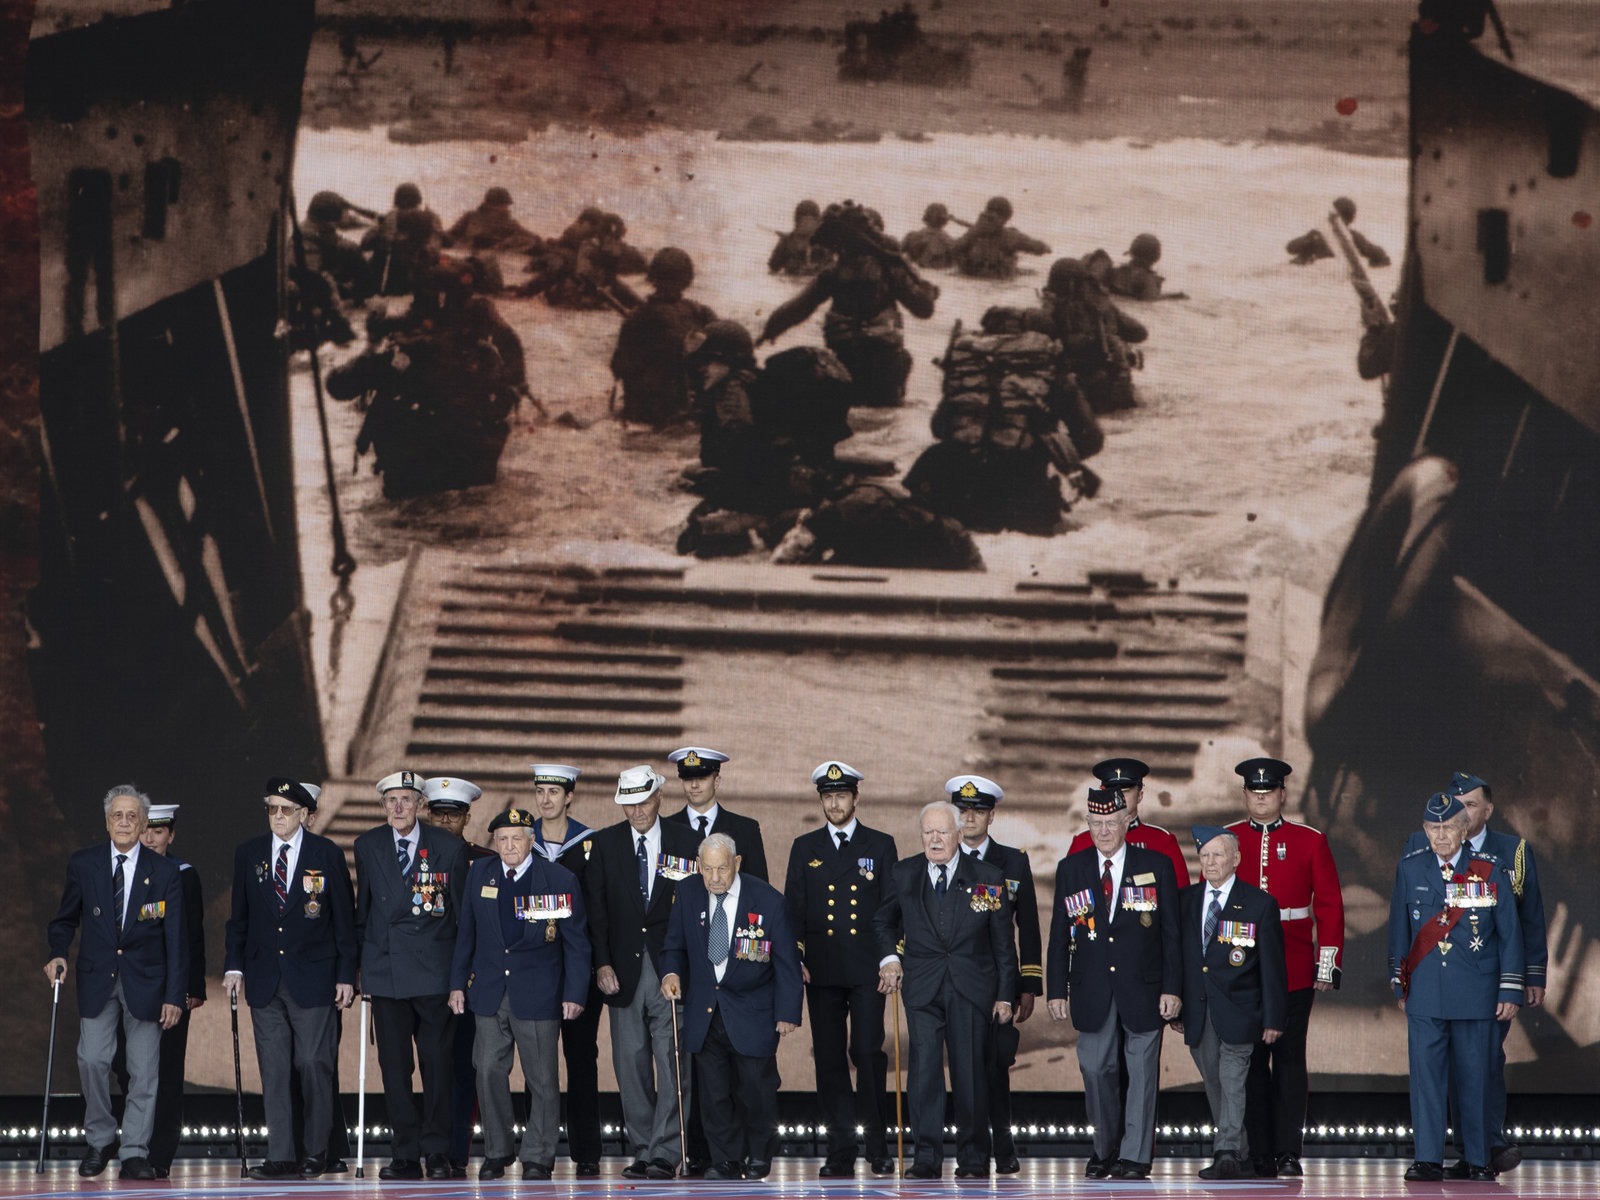 Veterans stand in front of a 1944 image of their comrades wading onto the beaches of France during D-Day commemorations in Portsmouth, England. Leaders of 16 countries involved in World War II joined Queen Elizabeth II at the ceremony on Wednesday. Dan Kitwood/Getty Images